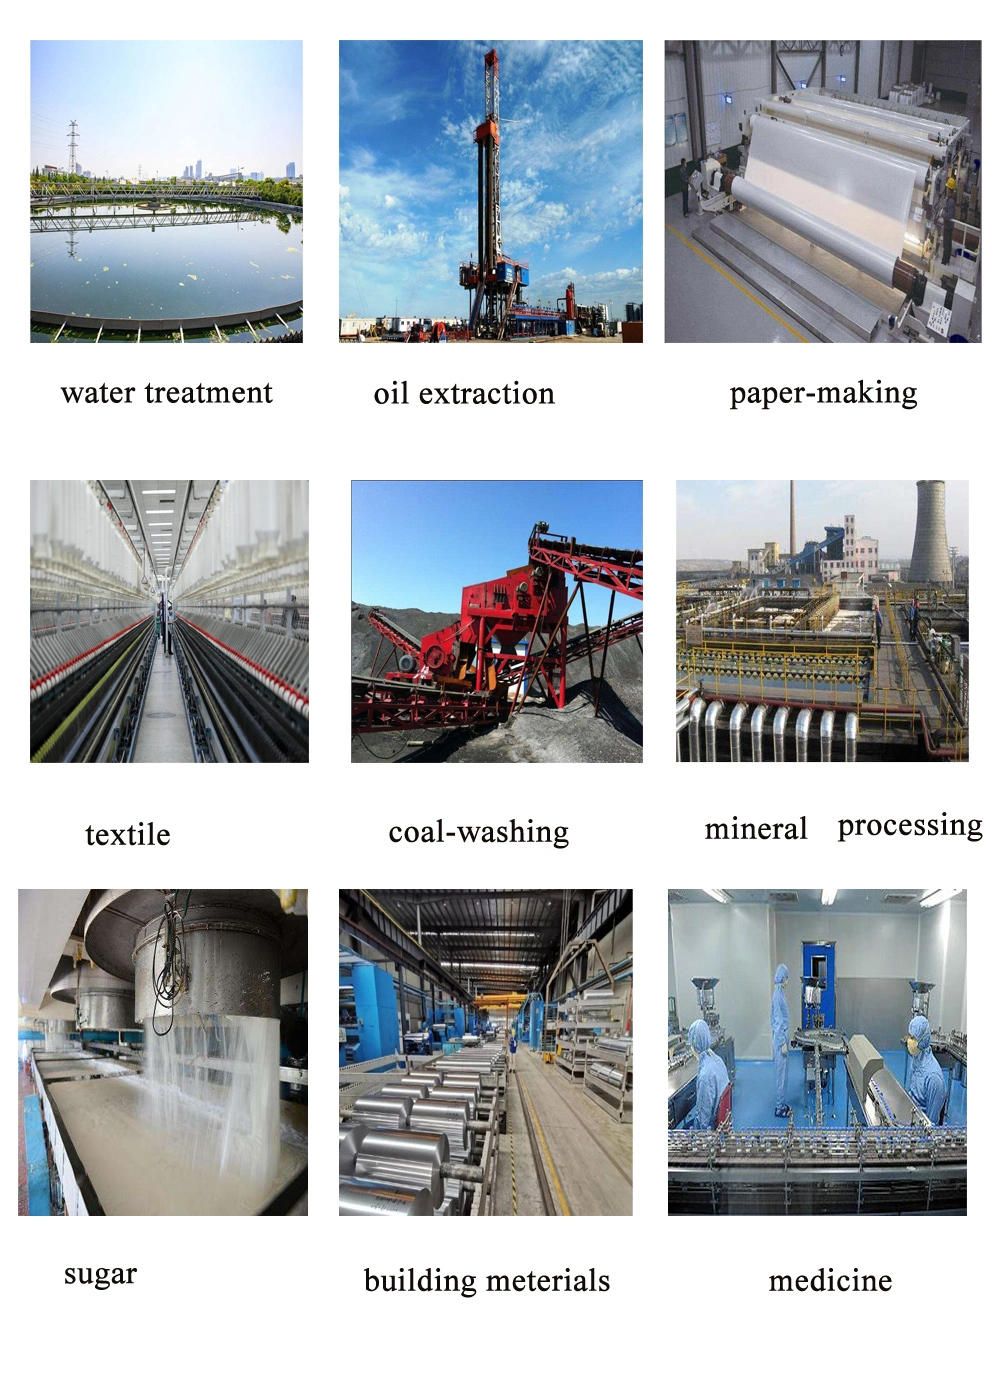 High Purity Oilfield Economics Auxiliary Clay Anti-Swelling Agent Cationic Polyacrylamide